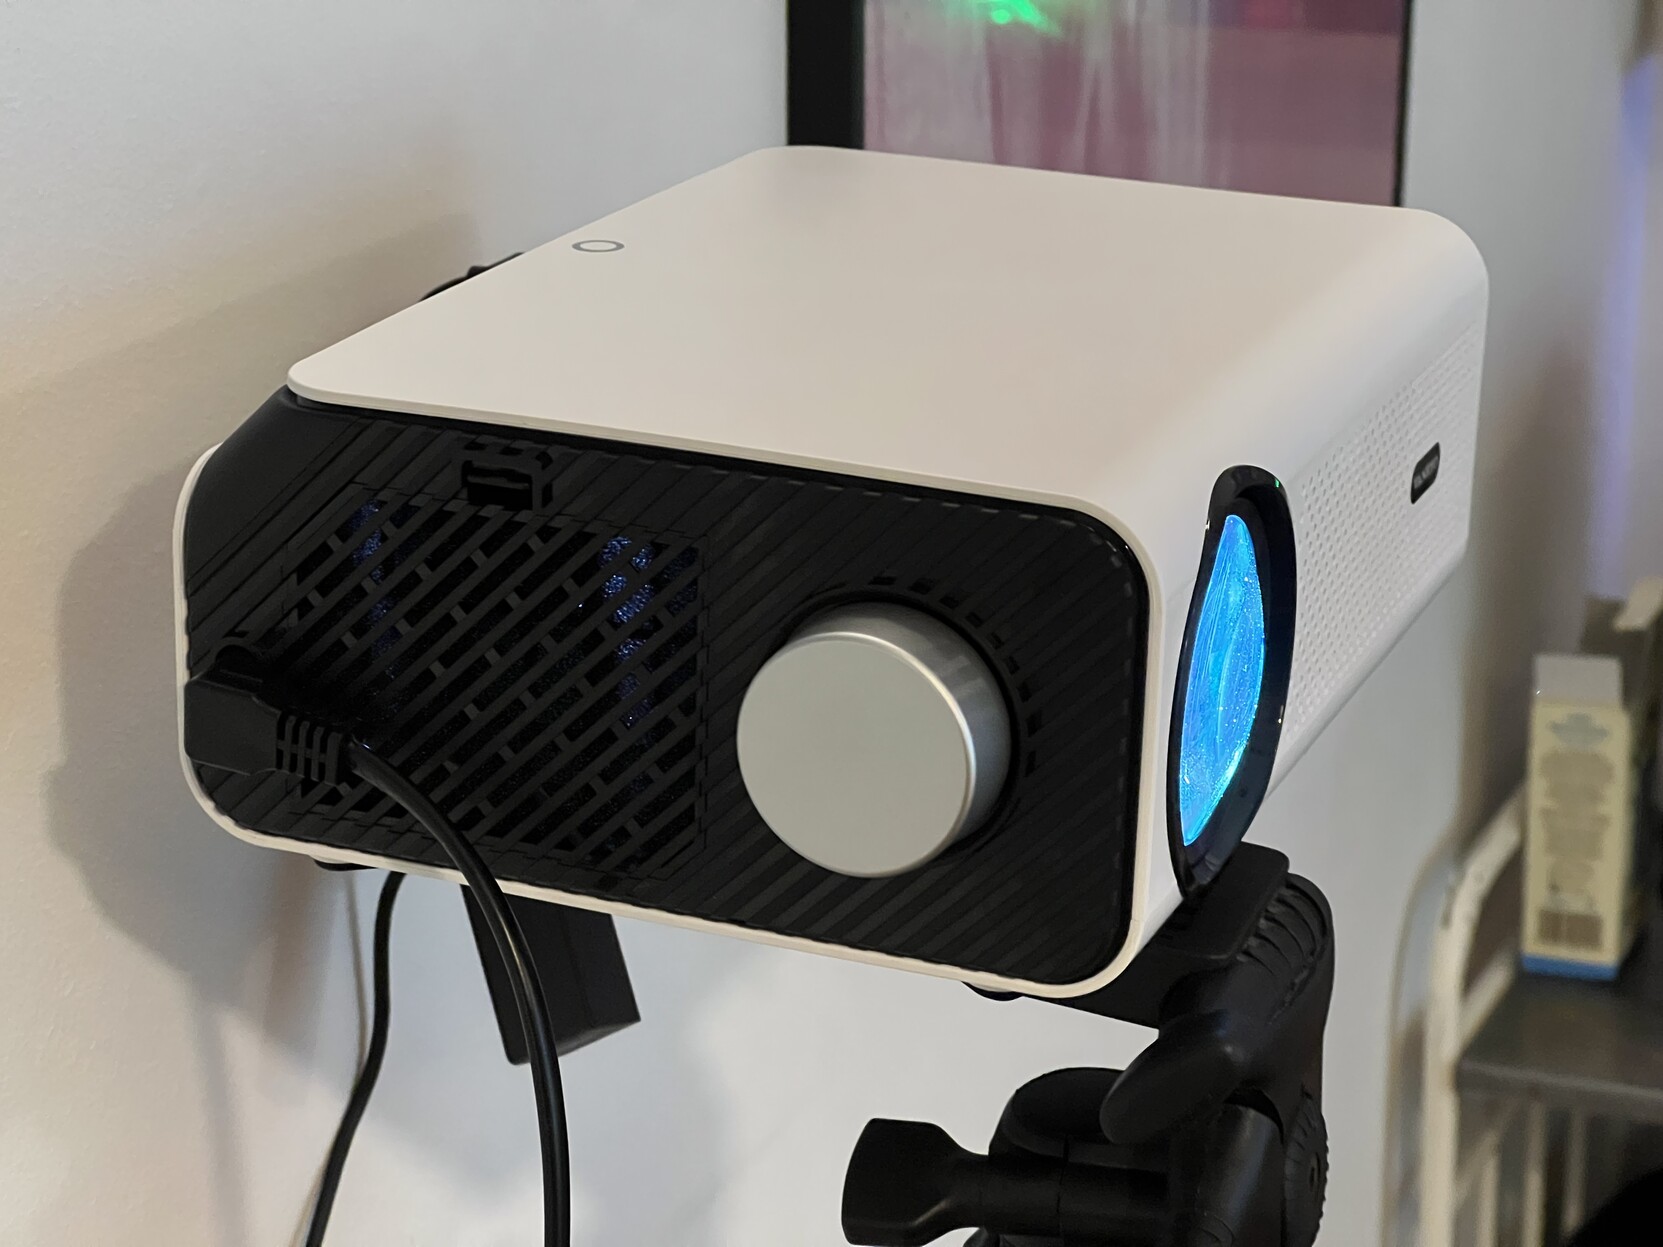 How To Reset A Vankyo Projector